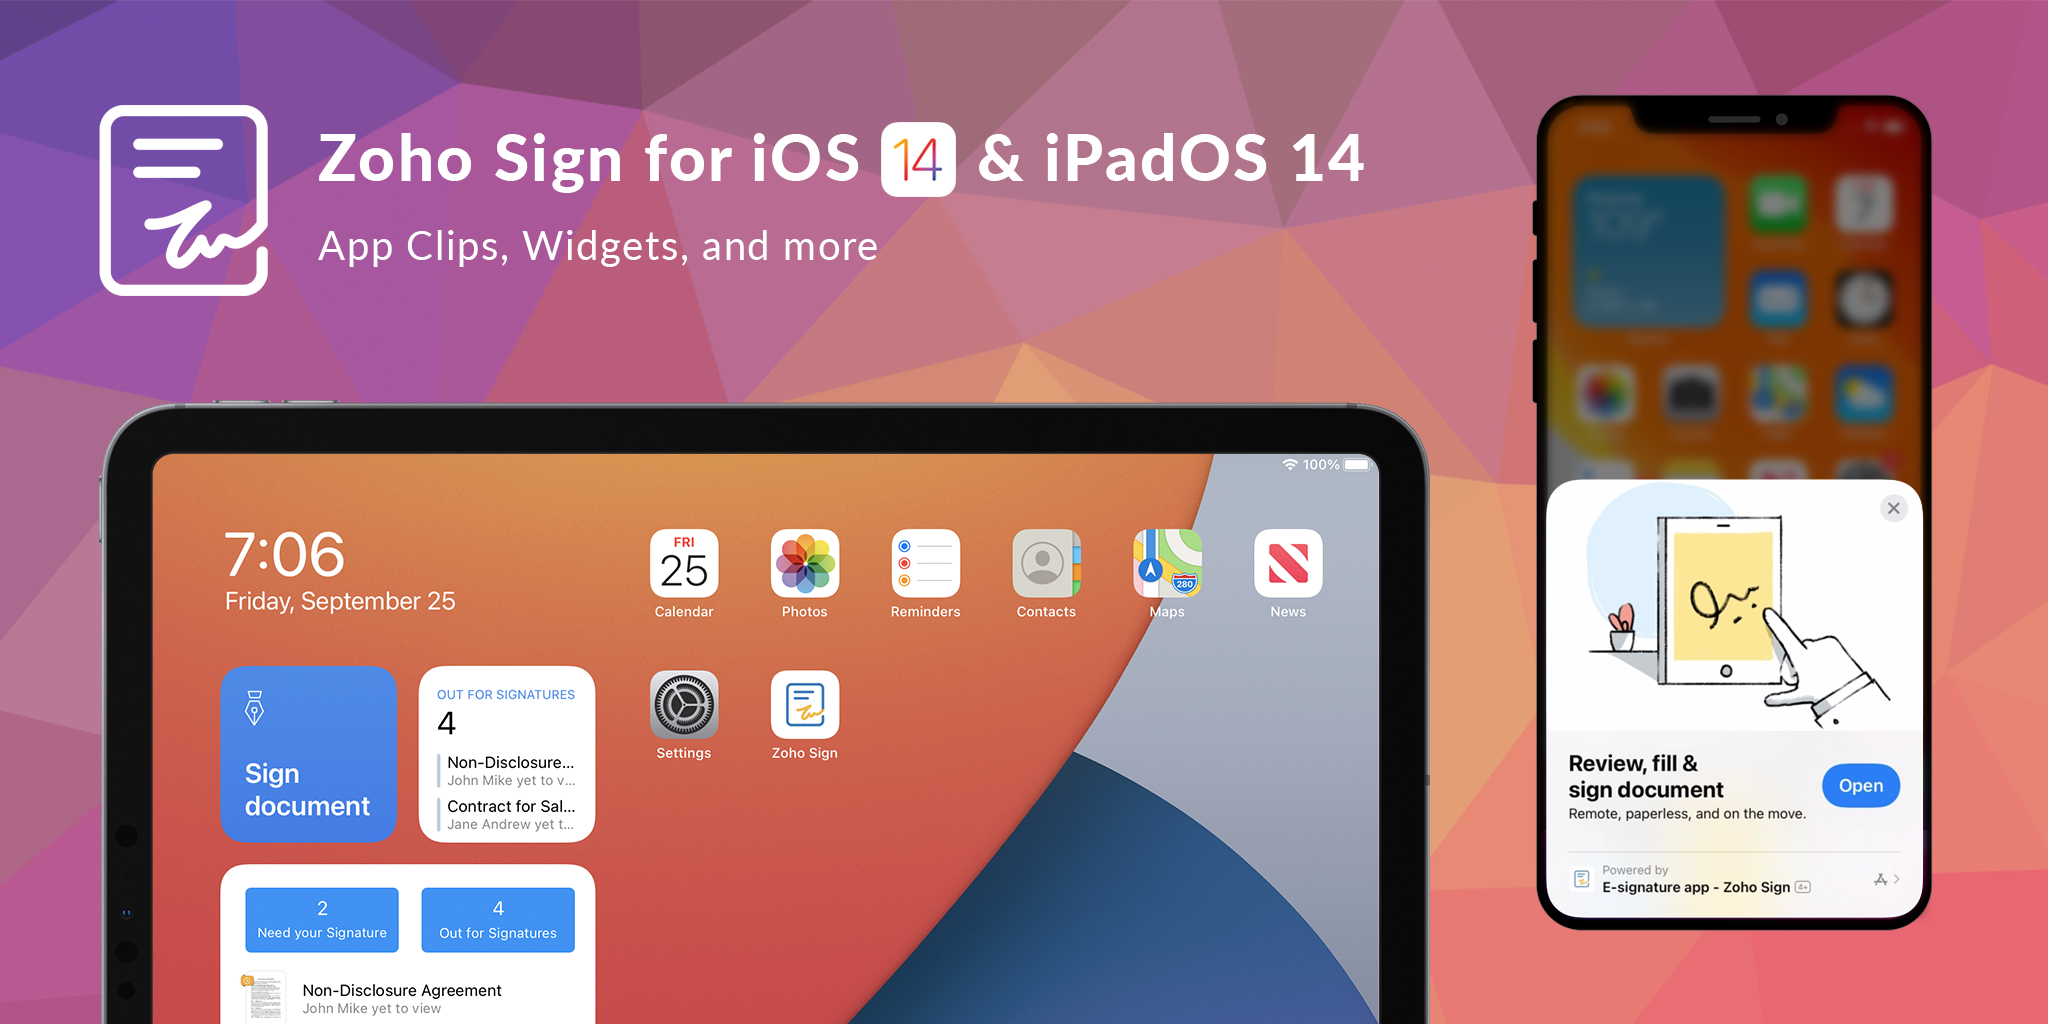 Zoho Sign for iOS 14 and iPadOS 14: App Clips, Widgets, and Scribble on the go